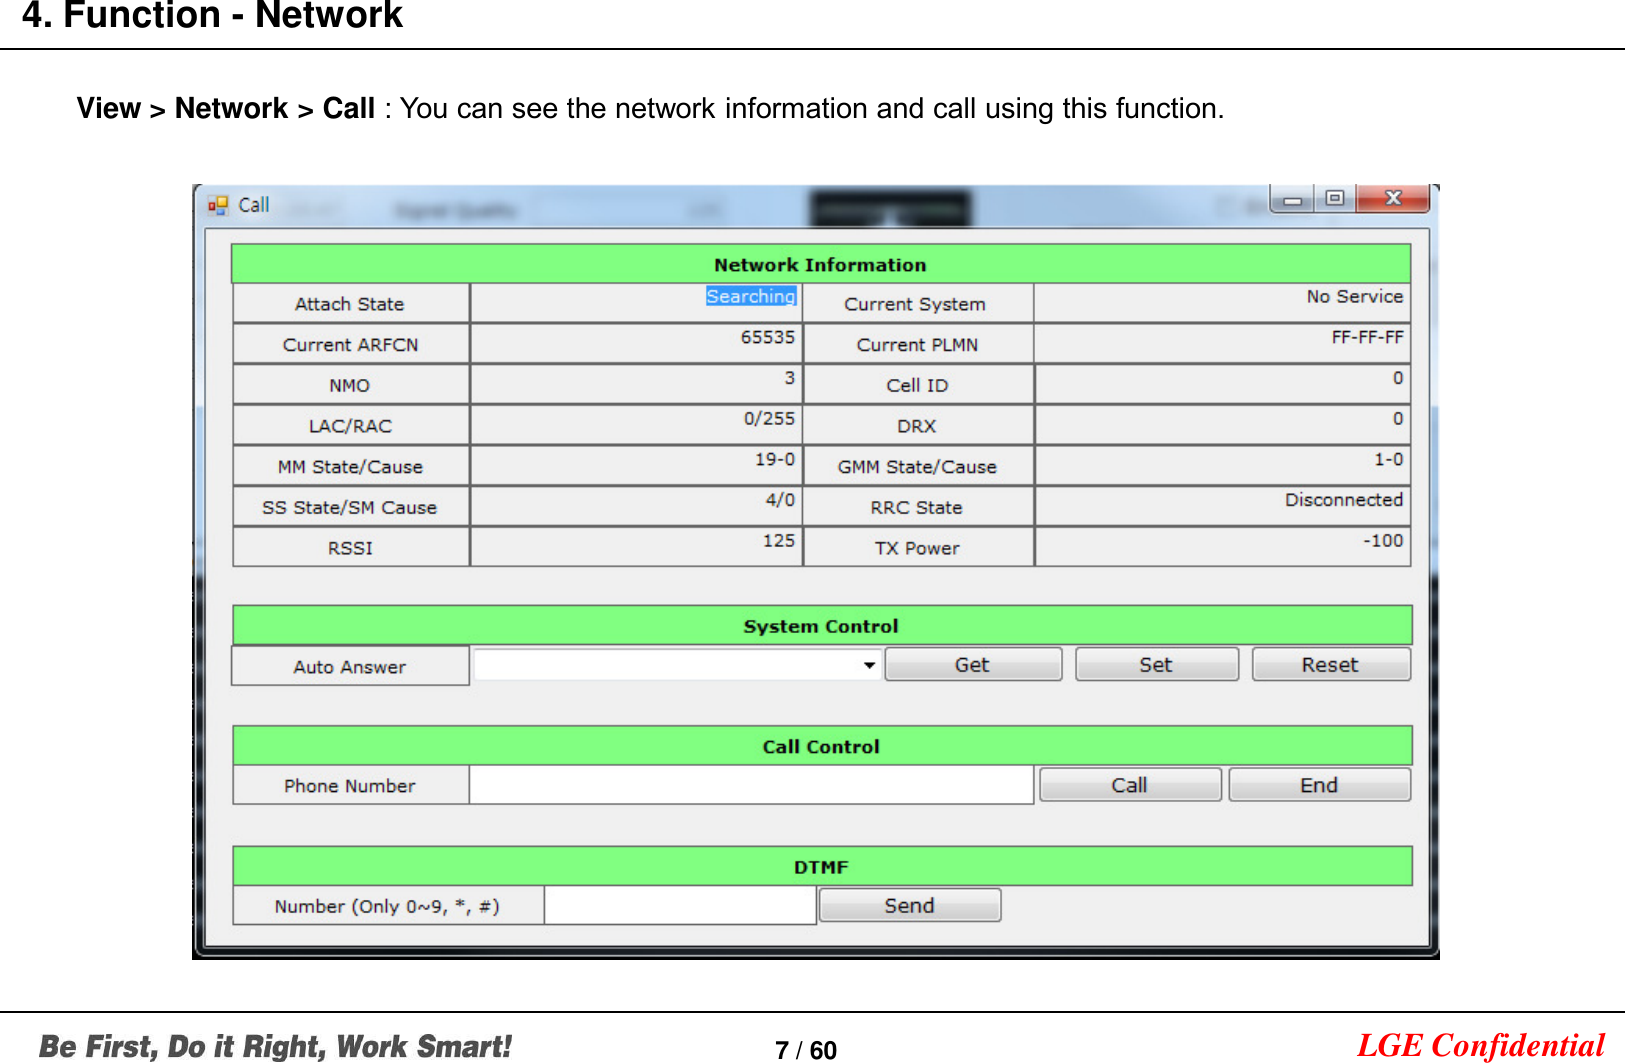 LGE Confidential4. Function - Network7 / 60View &gt; Network &gt; Call : You can see the network information and call using this function.